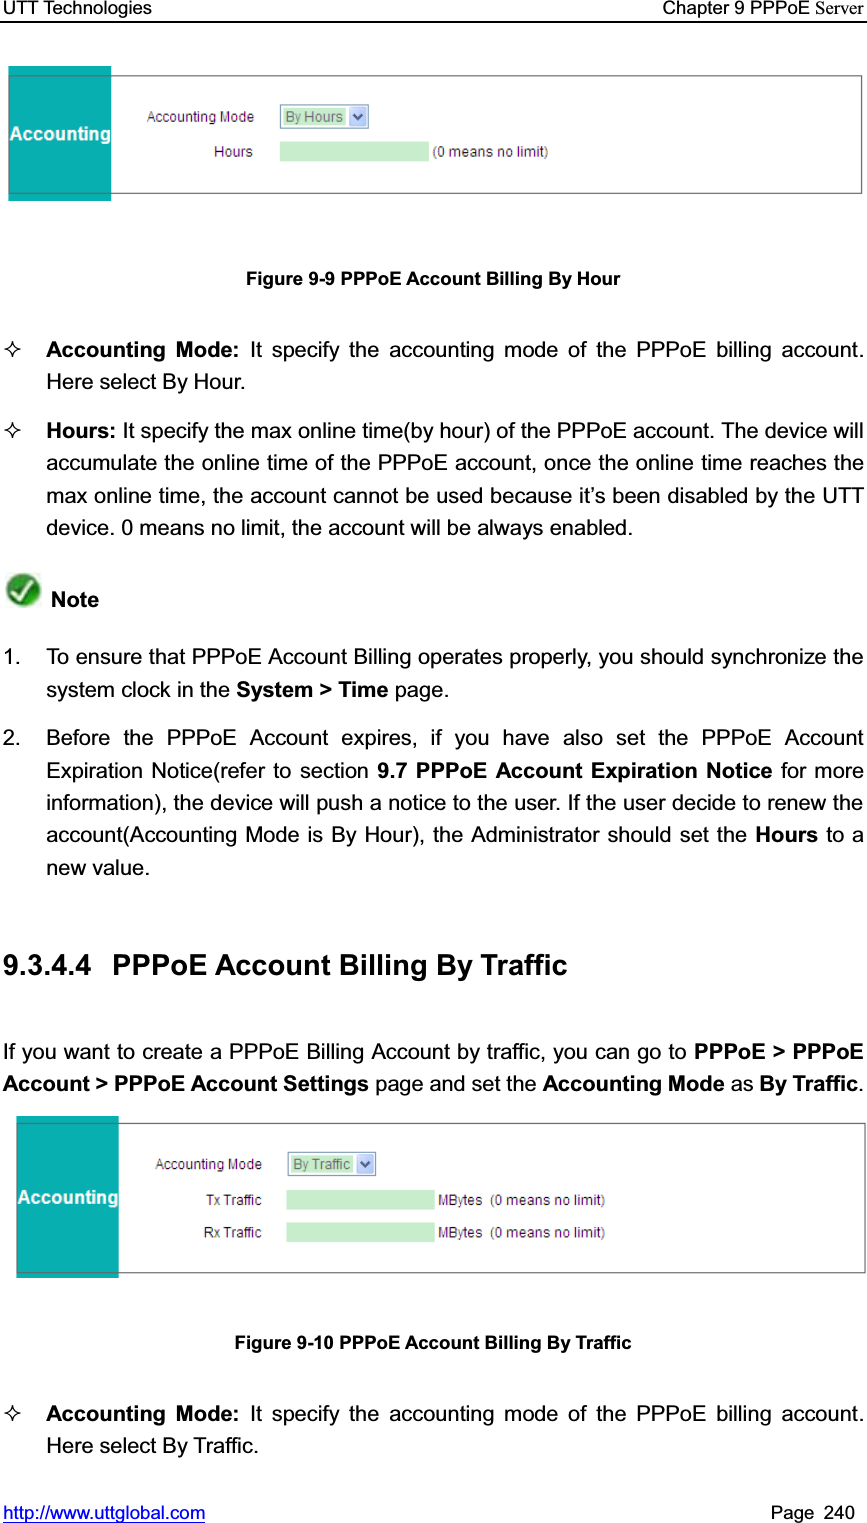 UTT Technologies    Chapter 9 PPPoE Serverhttp://www.uttglobal.com Page 240 Figure 9-9 PPPoE Account Billing By Hour Accounting Mode: It specify the accounting mode of the PPPoE billing account. Here select By Hour. Hours: It specify the max online time(by hour) of the PPPoE account. The device will accumulate the online time of the PPPoE account, once the online time reaches the max online time, the account cannot be used because it¶s been disabled by the UTT device. 0 means no limit, the account will be always enabled. Note1.  To ensure that PPPoE Account Billing operates properly, you should synchronize the system clock in the System &gt; Time page. 2.  Before the PPPoE Account expires, if you have also set the PPPoE Account Expiration Notice(refer to section 9.7 PPPoE Account Expiration Notice for more information), the device will push a notice to the user. If the user decide to renew the account(Accounting Mode is By Hour), the Administrator should set the Hours to a new value. 9.3.4.4  PPPoE Account Billing By Traffic If you want to create a PPPoE Billing Account by traffic, you can go to PPPoE &gt; PPPoE Account &gt; PPPoE Account Settings page and set the Accounting Mode as By Traffic.Figure 9-10 PPPoE Account Billing By Traffic Accounting Mode: It specify the accounting mode of the PPPoE billing account. Here select By Traffic. 